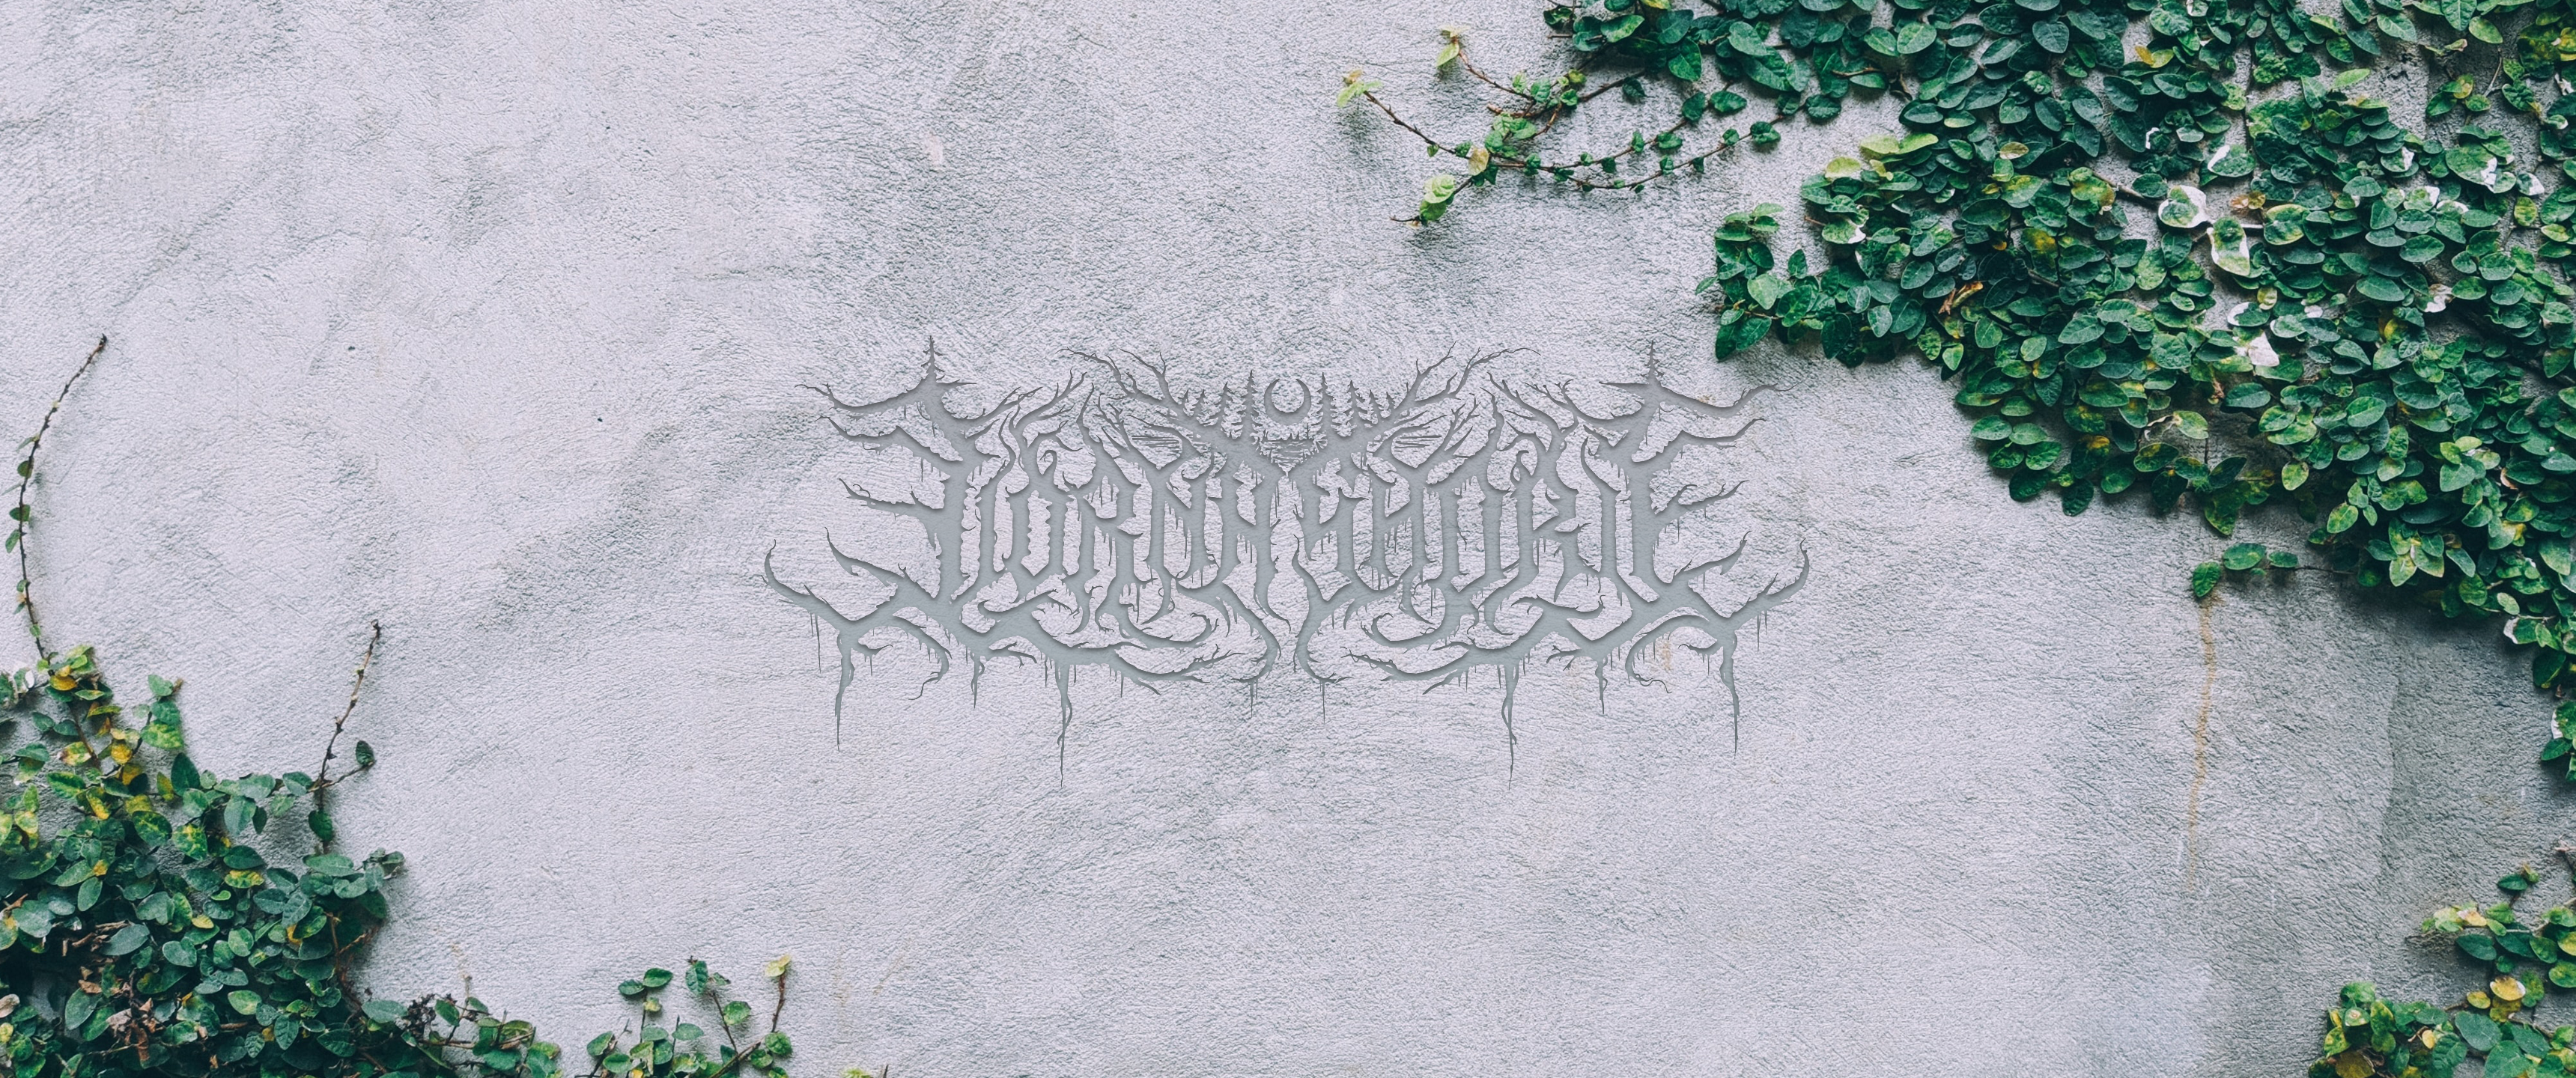 General 3440x1440 Lorna Shore ivy wall deathcore band band logo logo simple background ultrawide